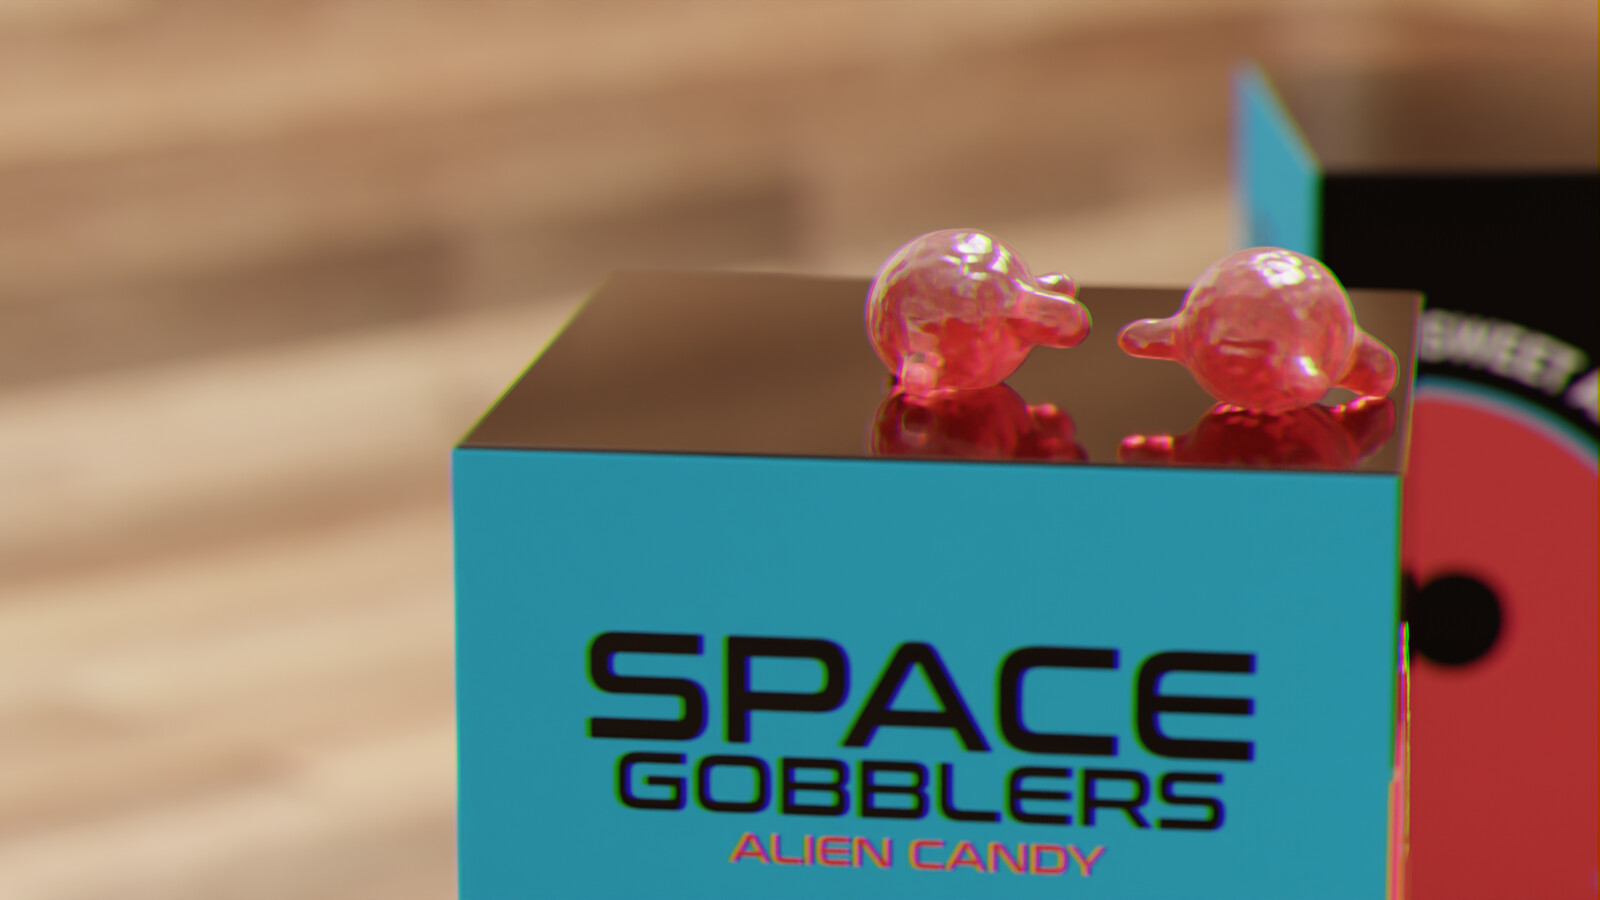 Space Gobblers candy product and brand design concept